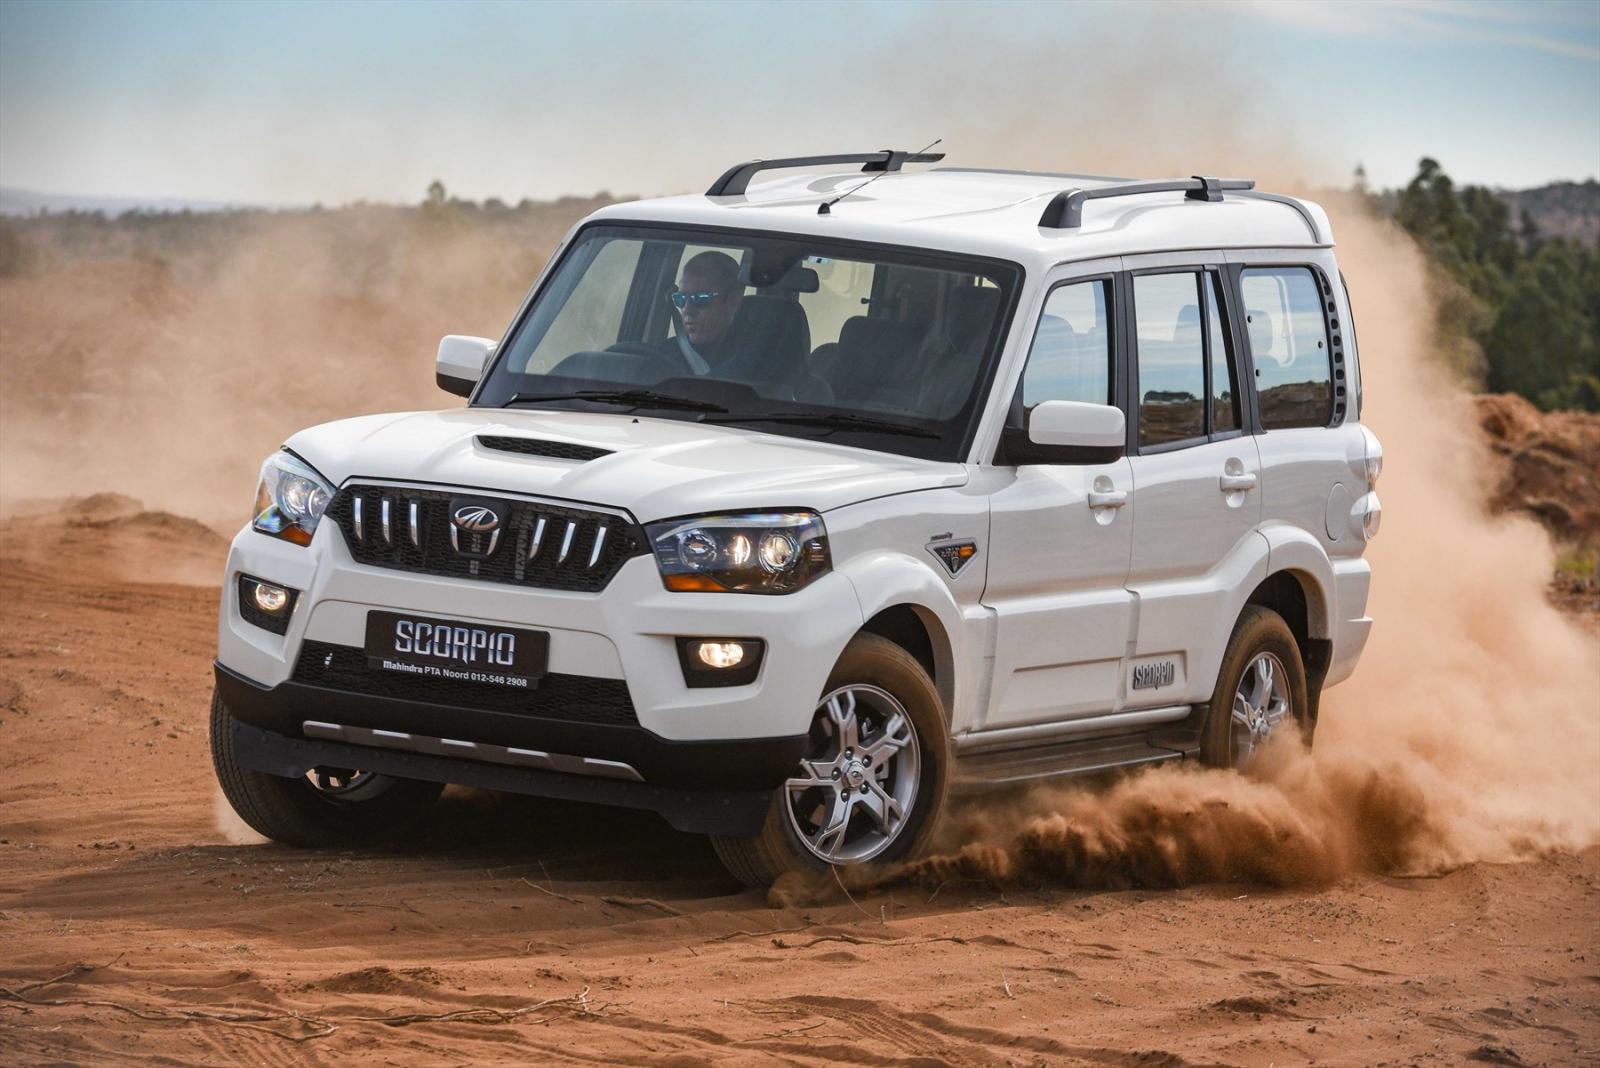 Bs Vi 2020 Mahindra Scorpio Booking Starts Online With Token Amount Of Inr 5000 The Indian Wire